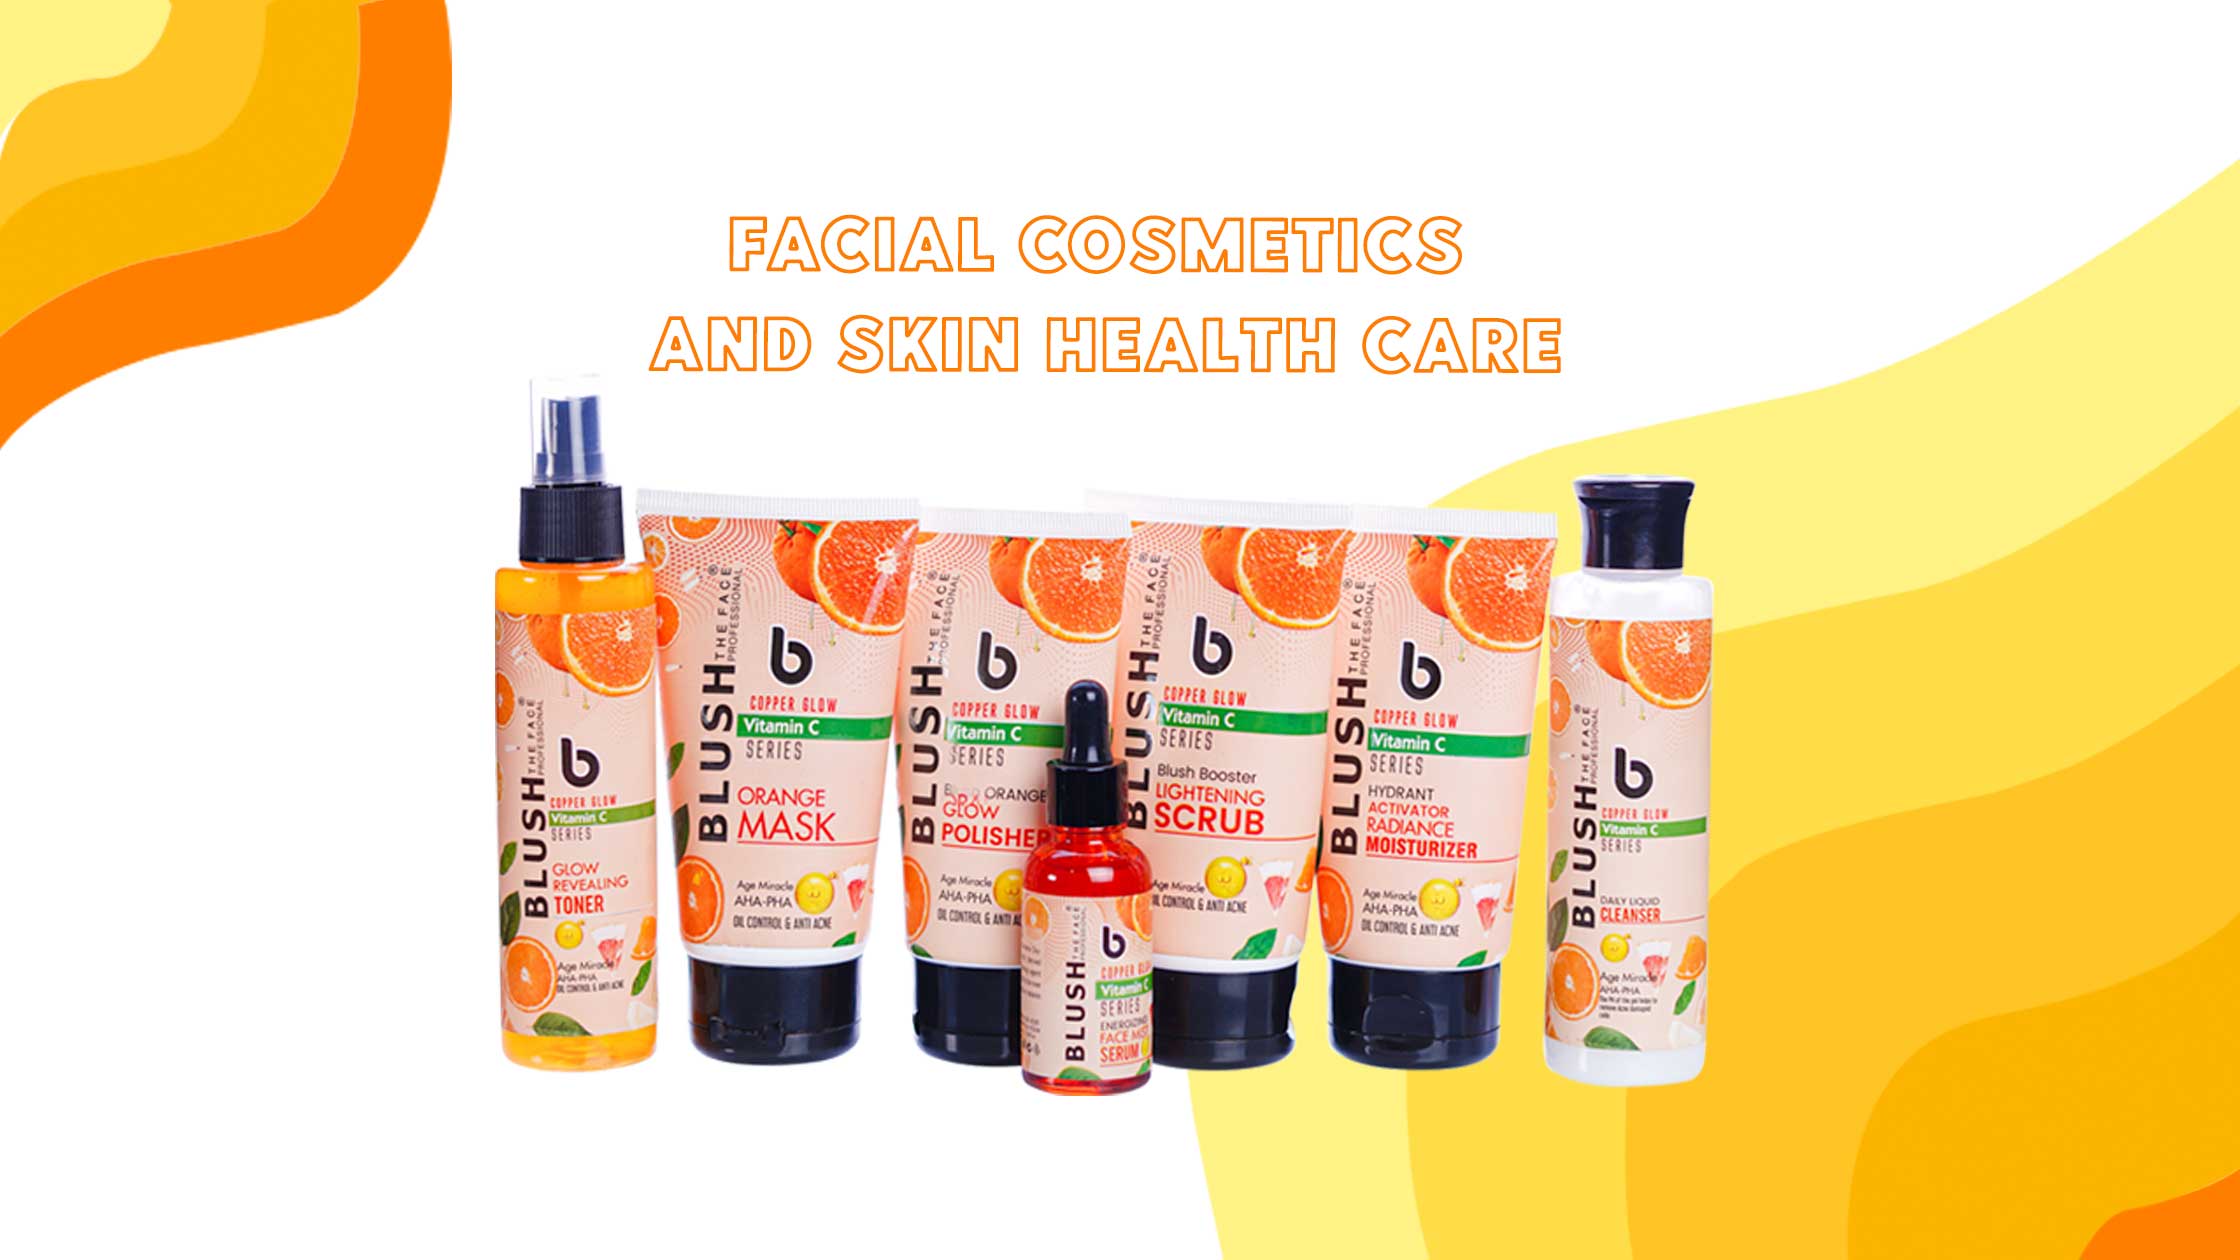 Facial Cosmetics and Skin Health Care